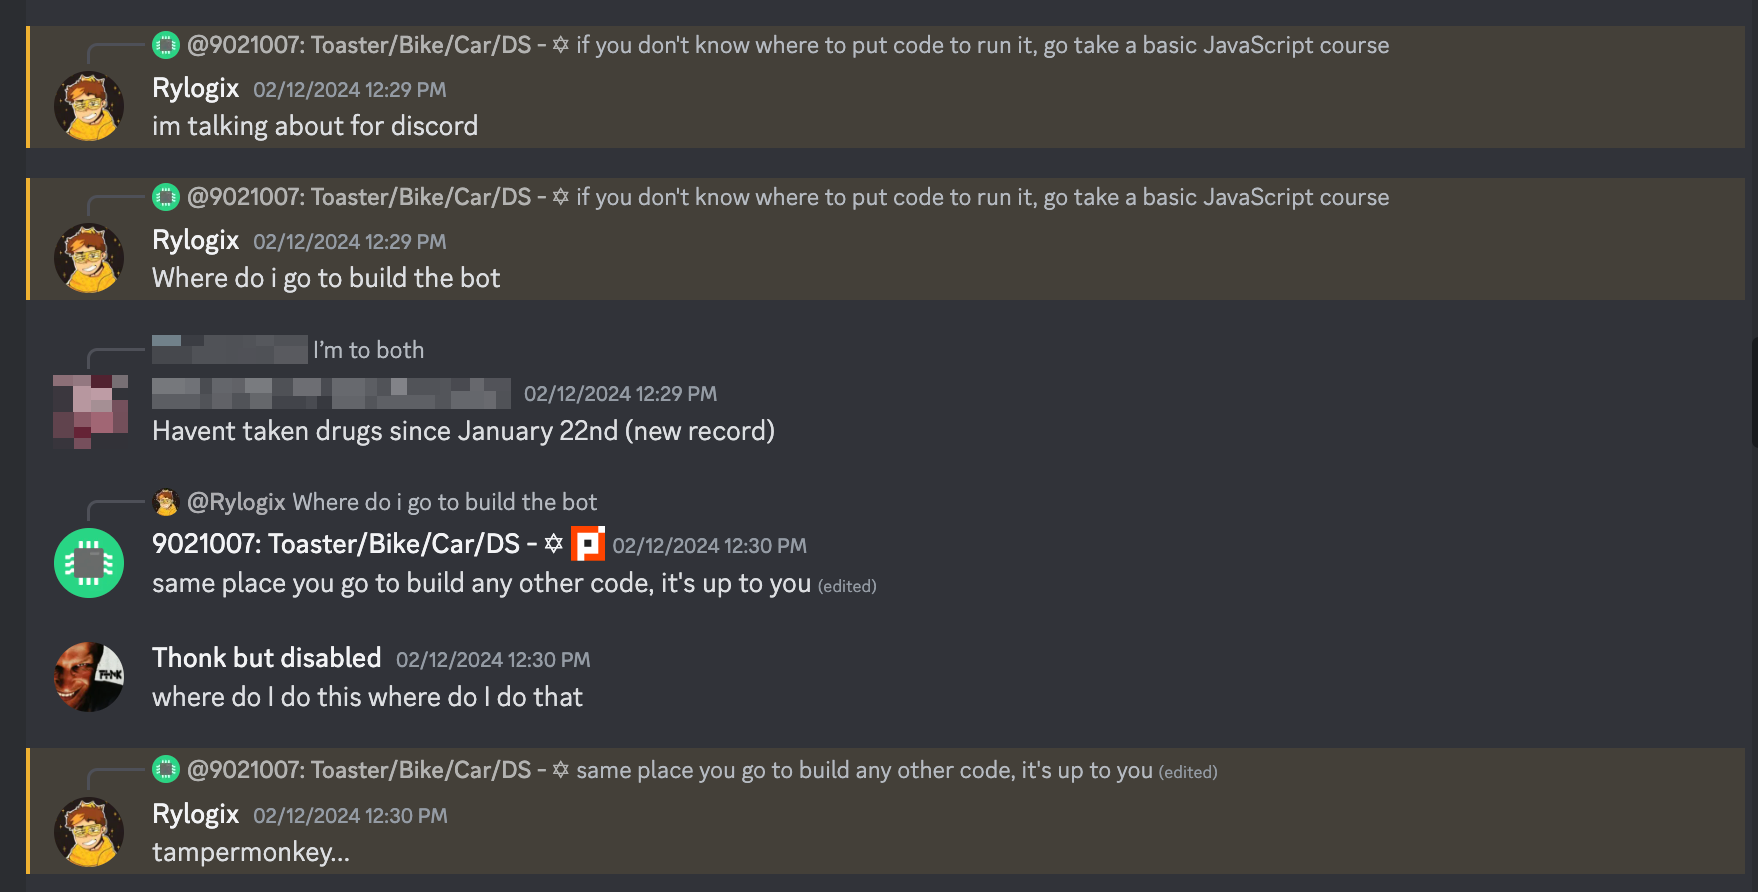 screenshot of discord messages, "im talking about for discord", "Where do i go to build the bot", "same place you go to build any other code, it's up to you", "tampermonkey..." In between the messages, someone else mentions that they have been free of drugs since January 22nd. Their name is blurred.